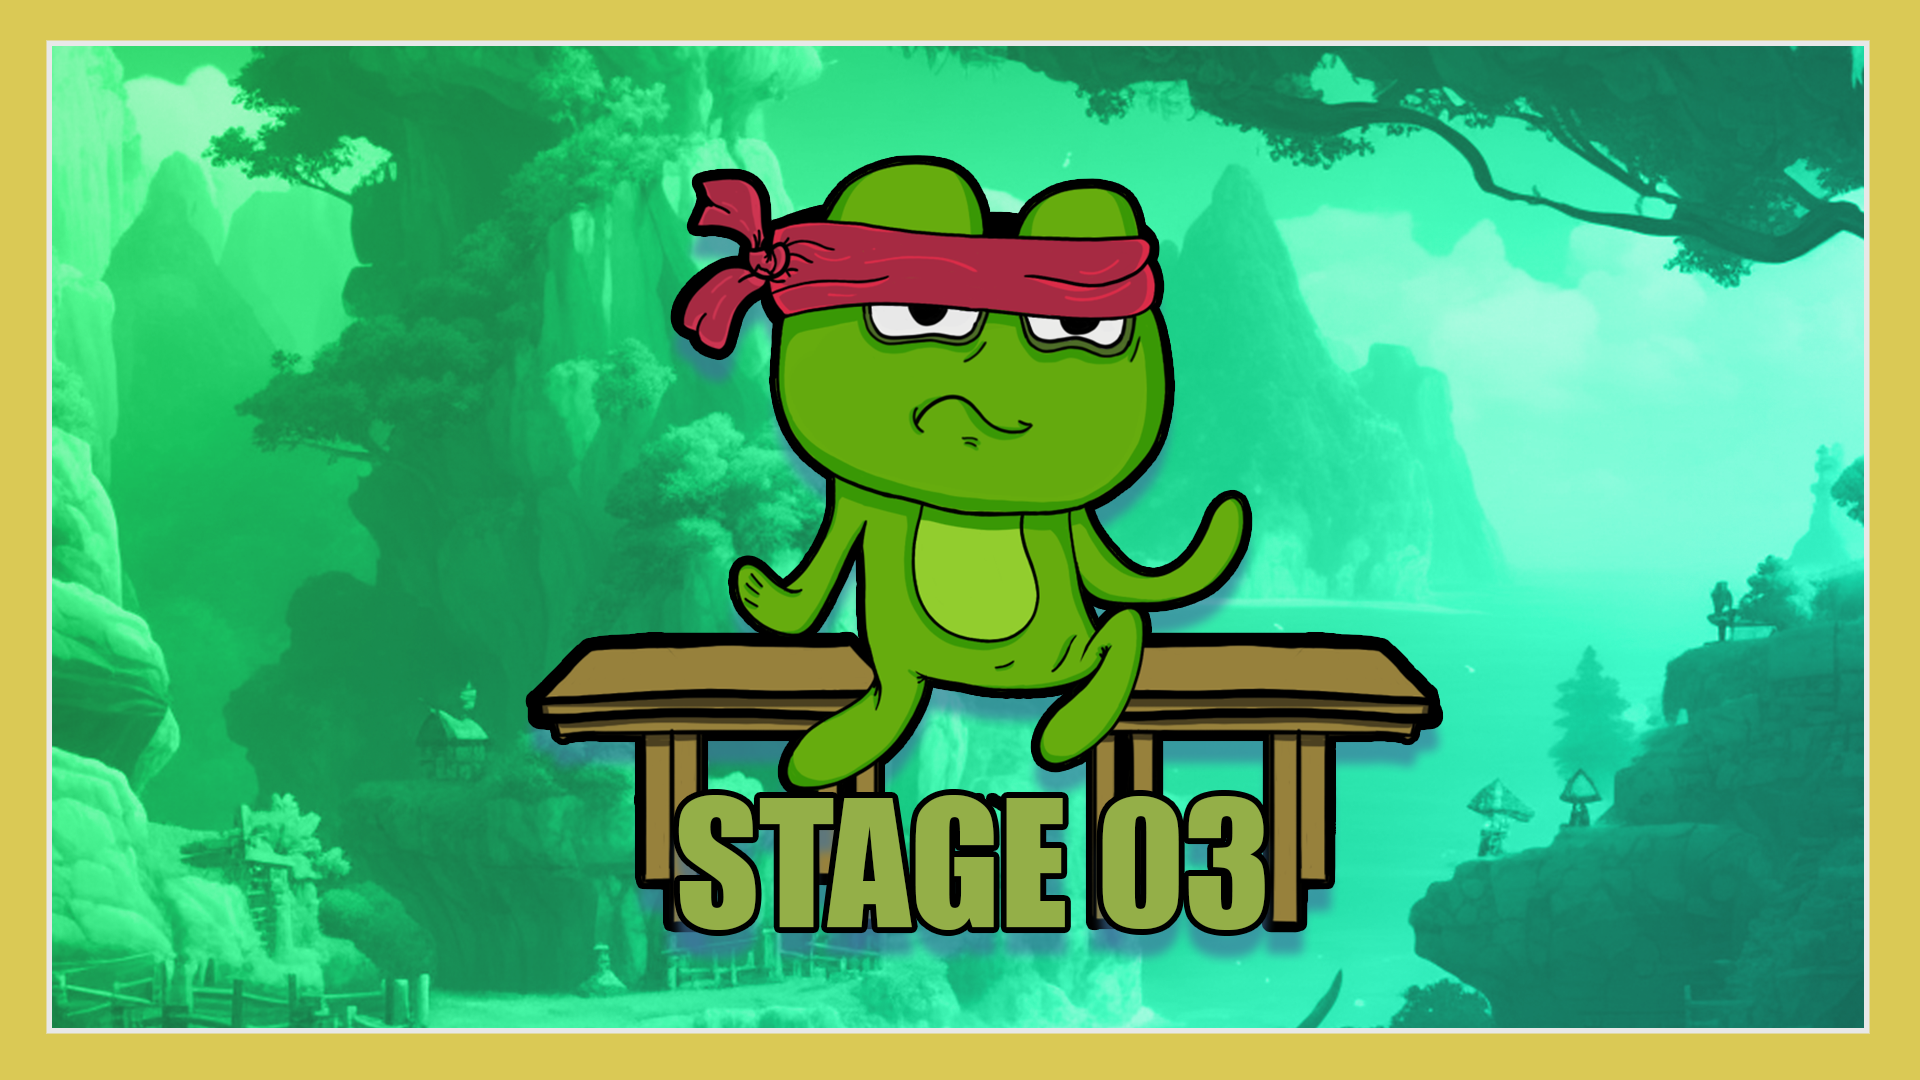 STAGE 03